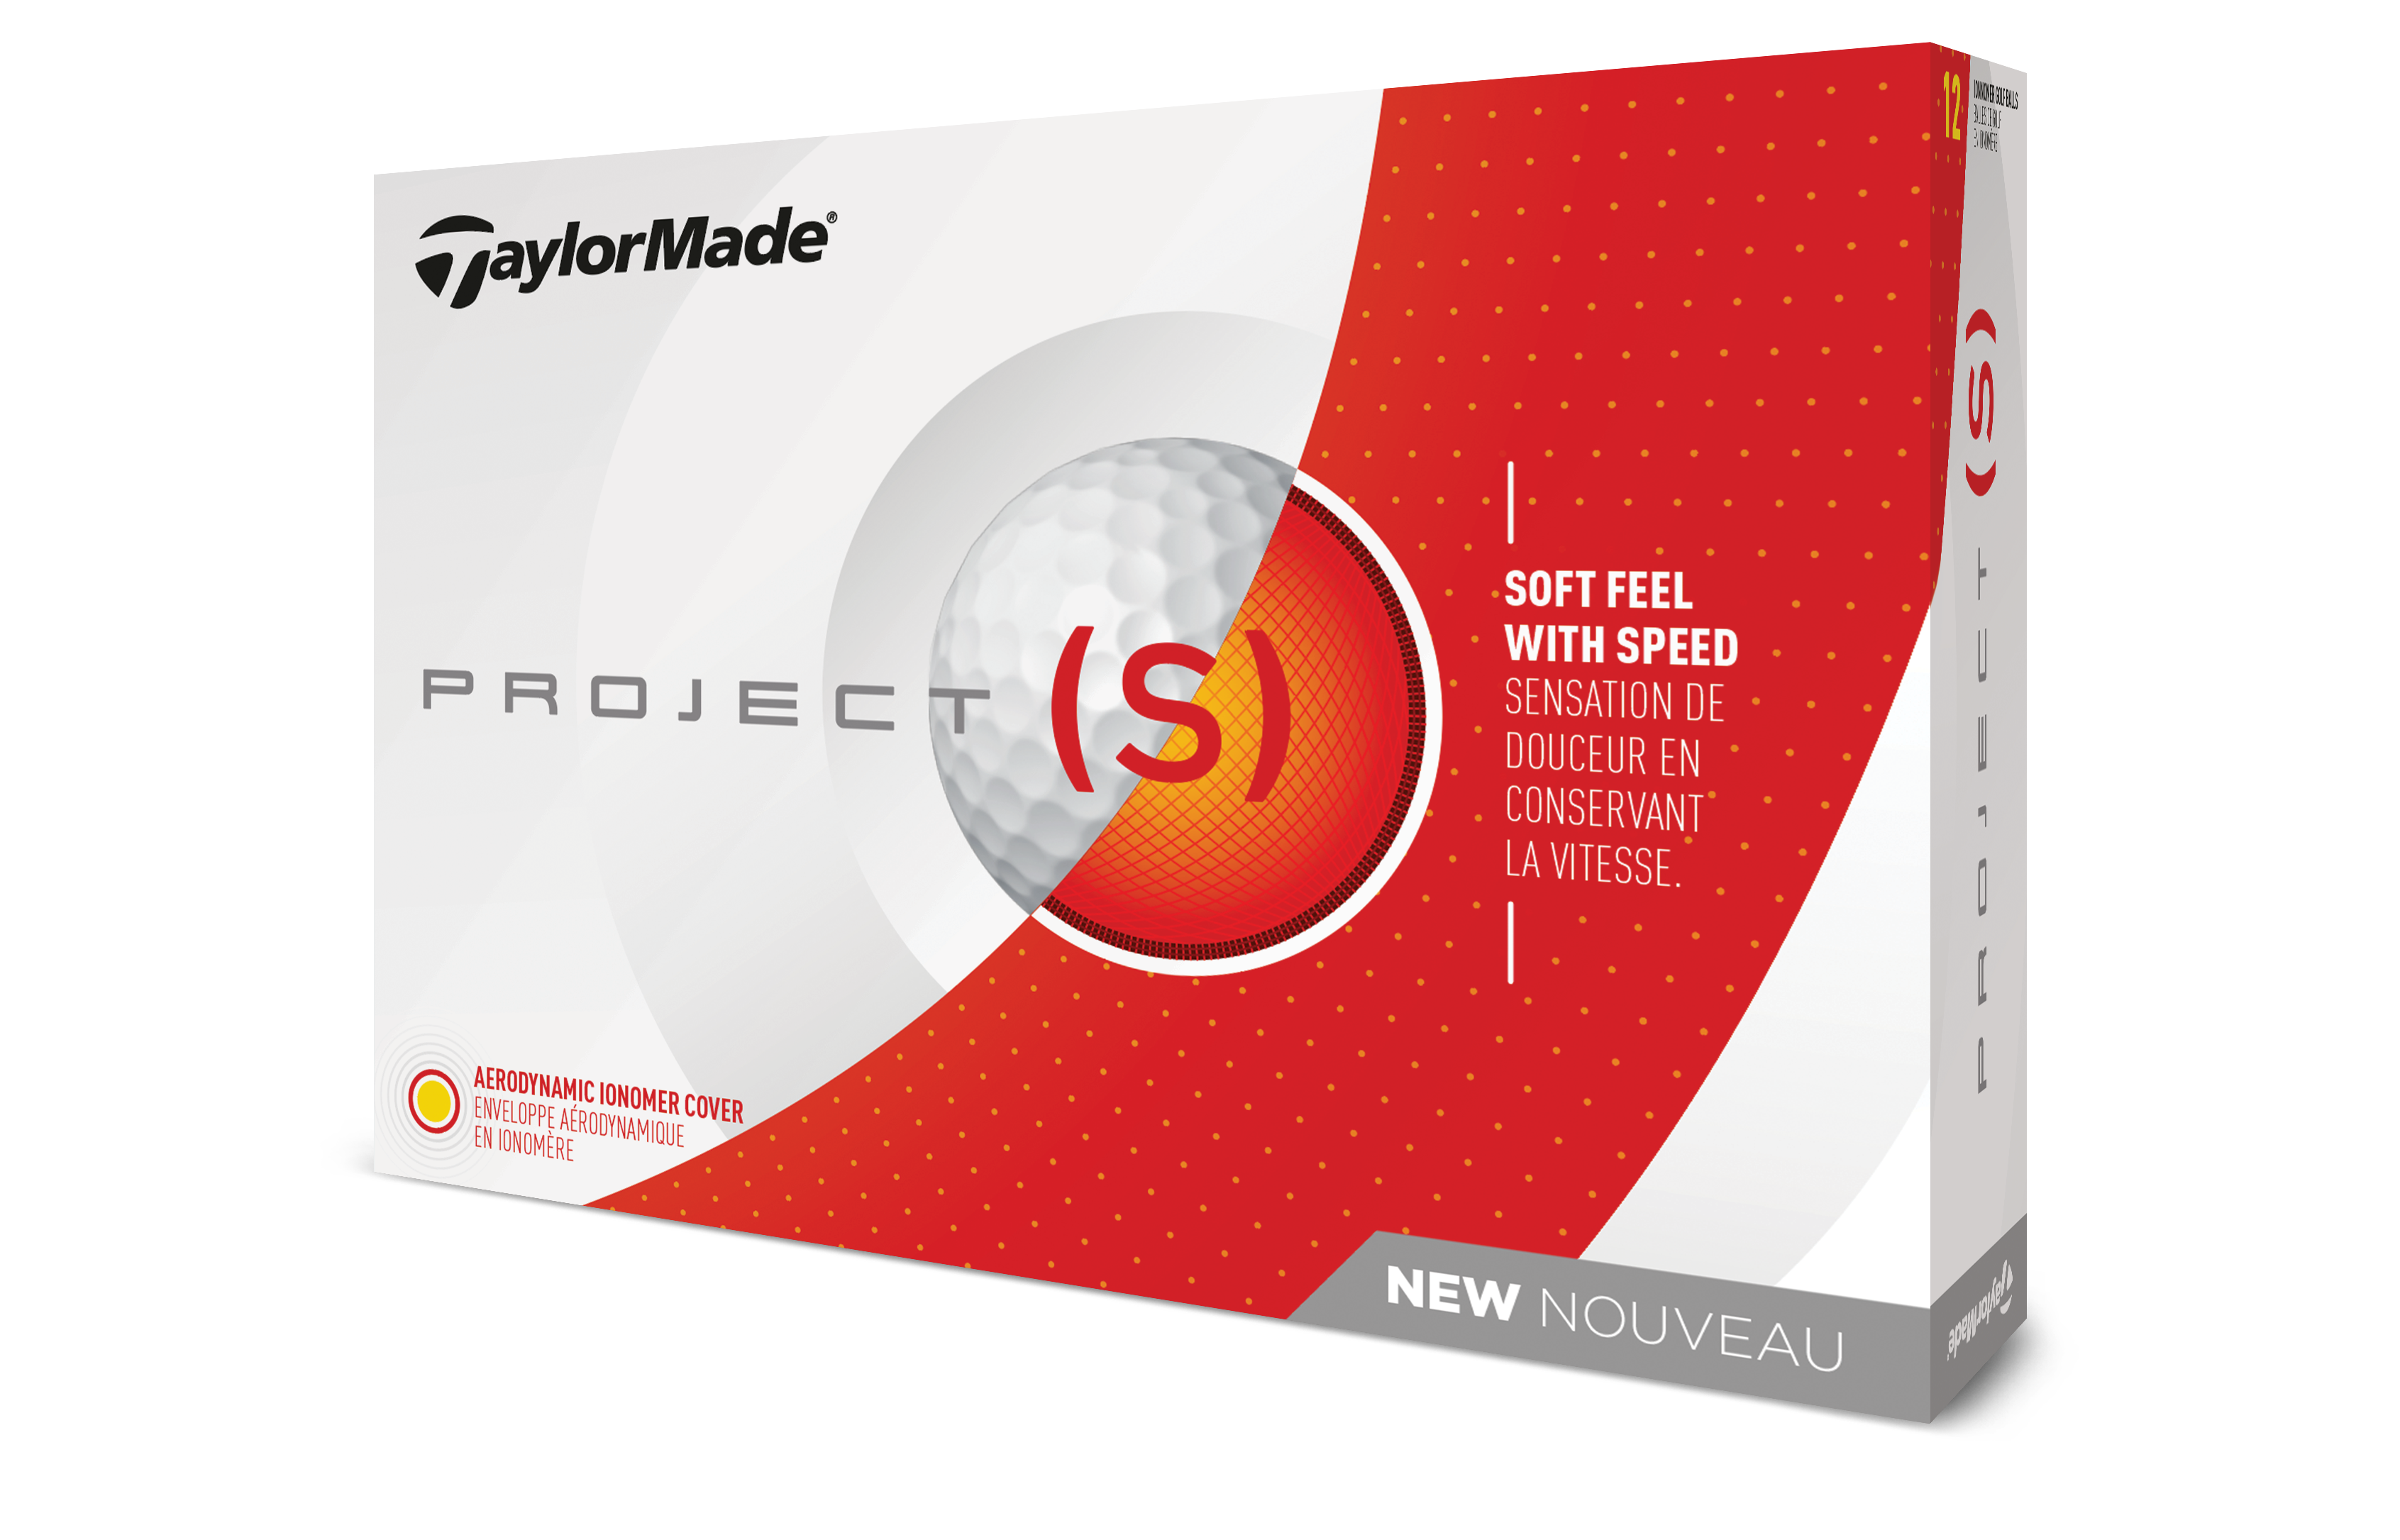 TaylorMade Project (s) Golf Balls, 12 Pack - image 1 of 2